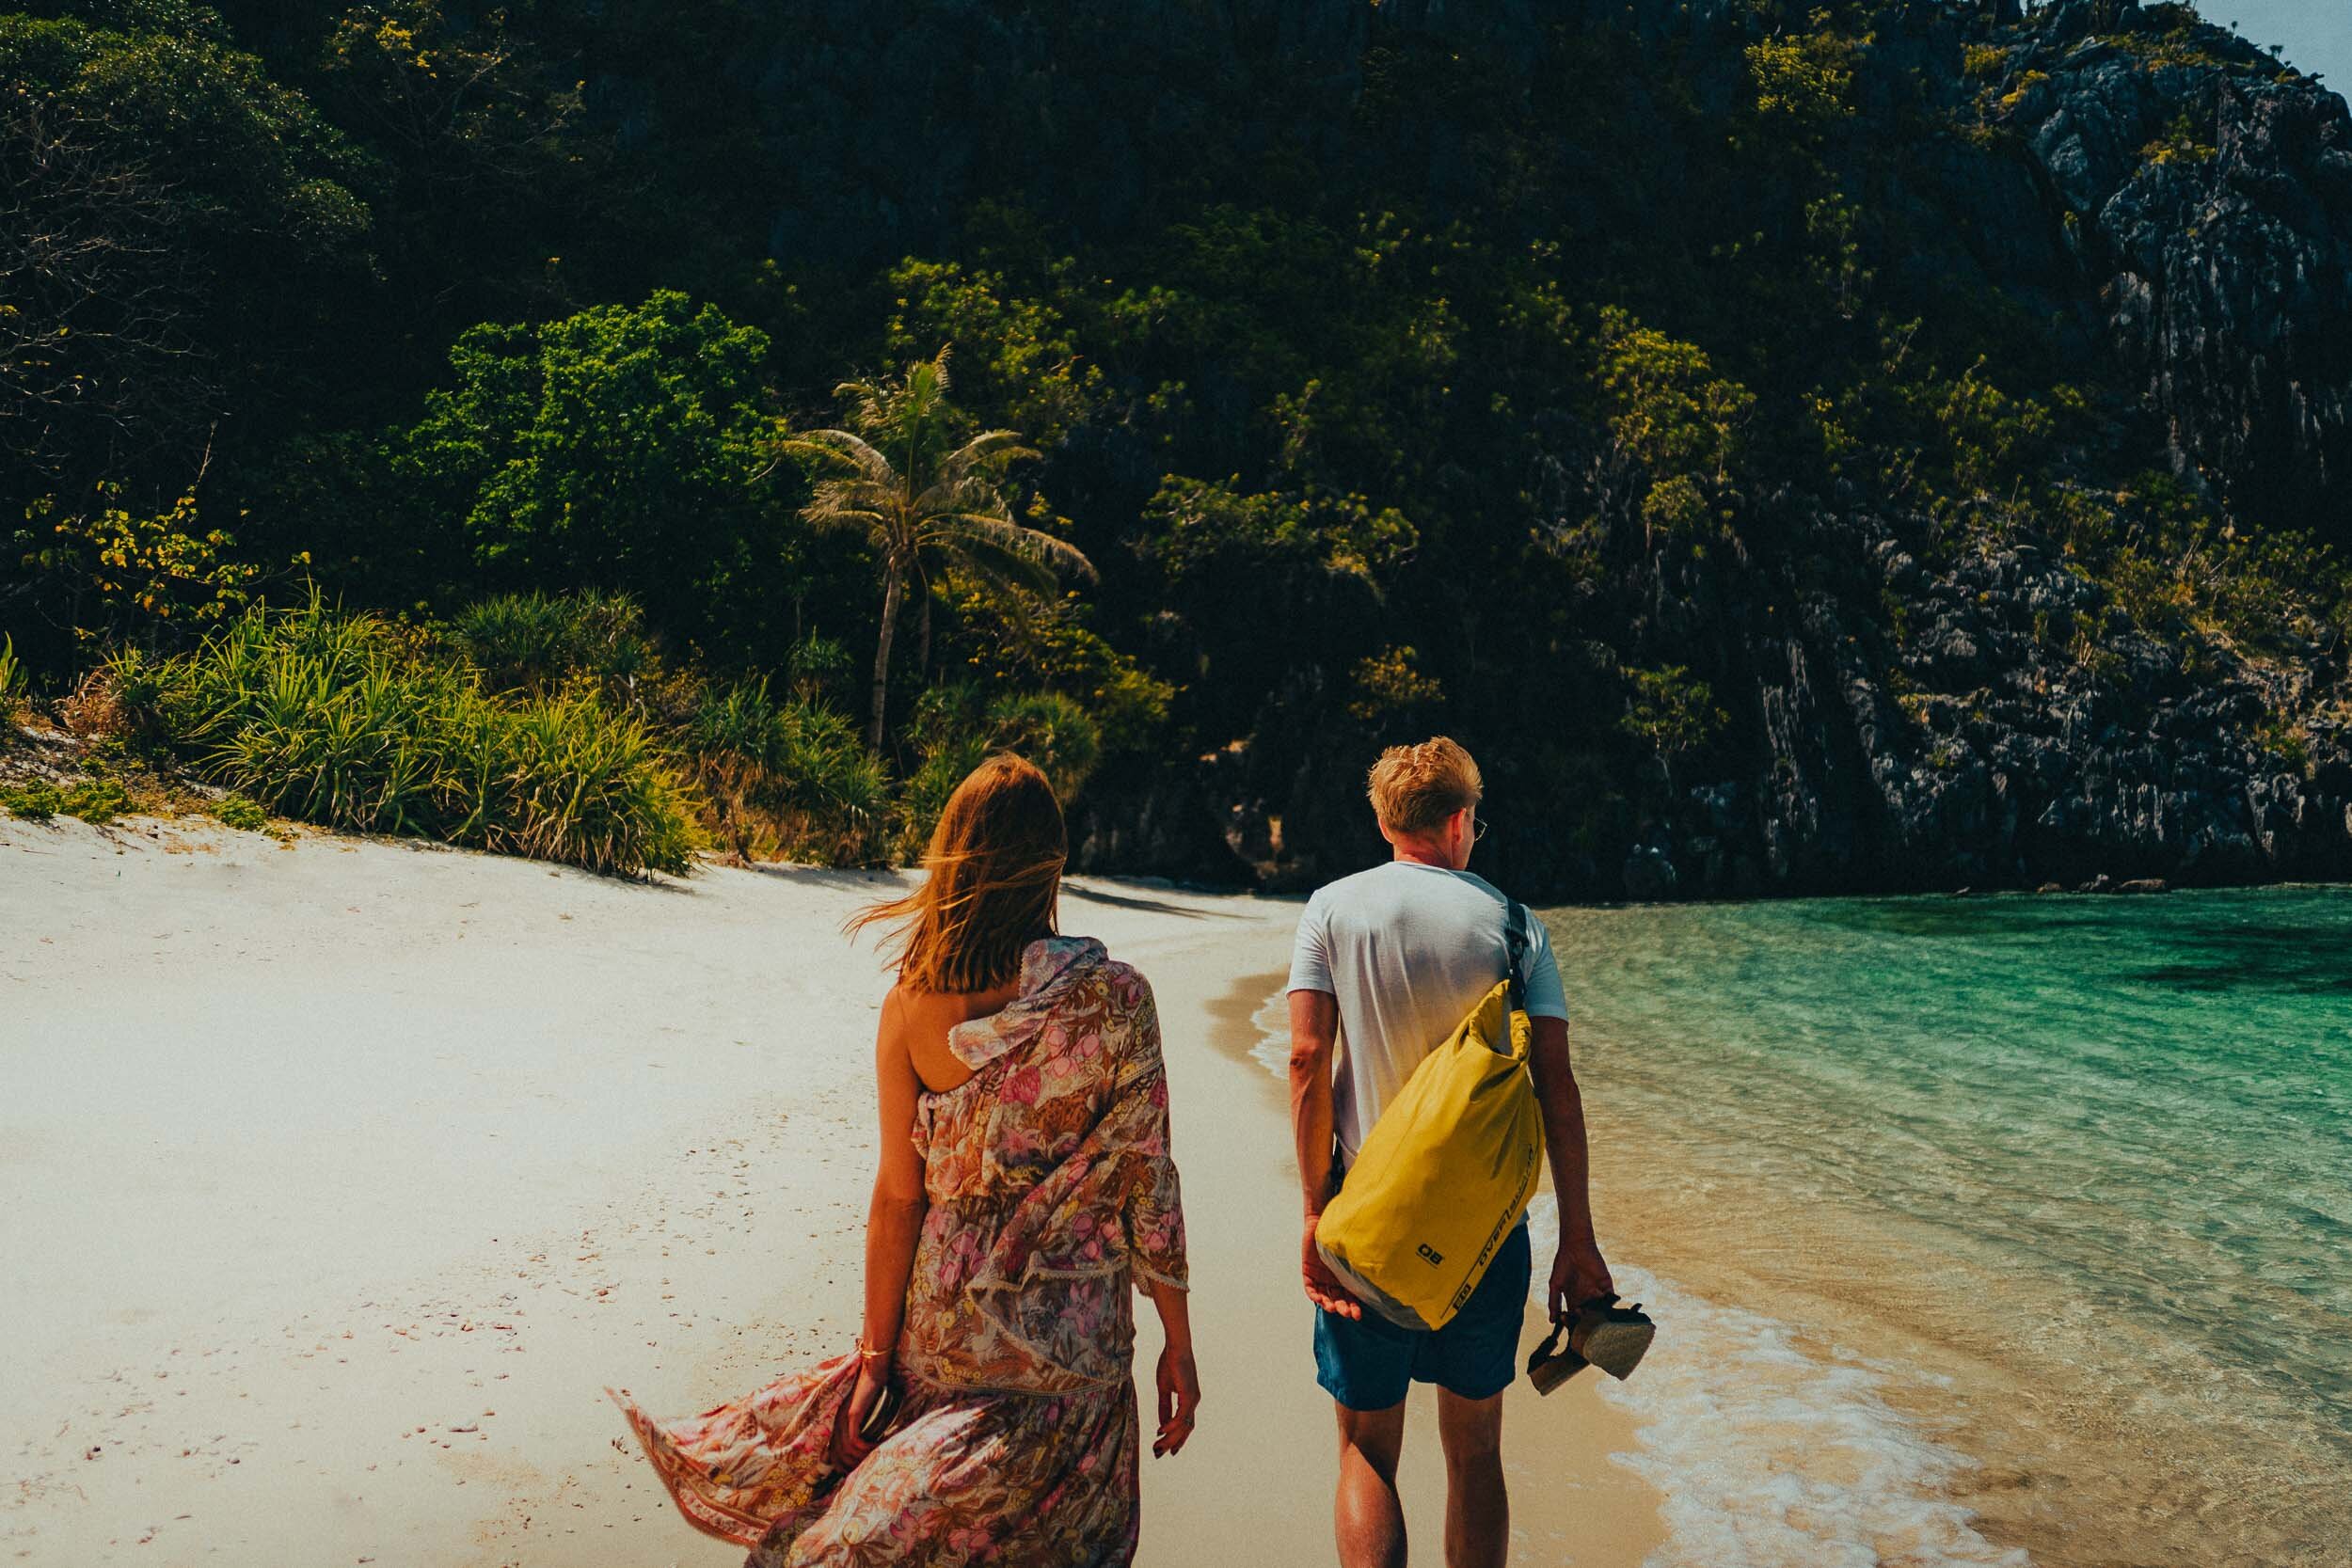 4 El Nido Philippines Couple Photography Honeymoon portraits in Palawan, March 2020. Travel couple photography in Southeast Asia x @hejguj.jpg